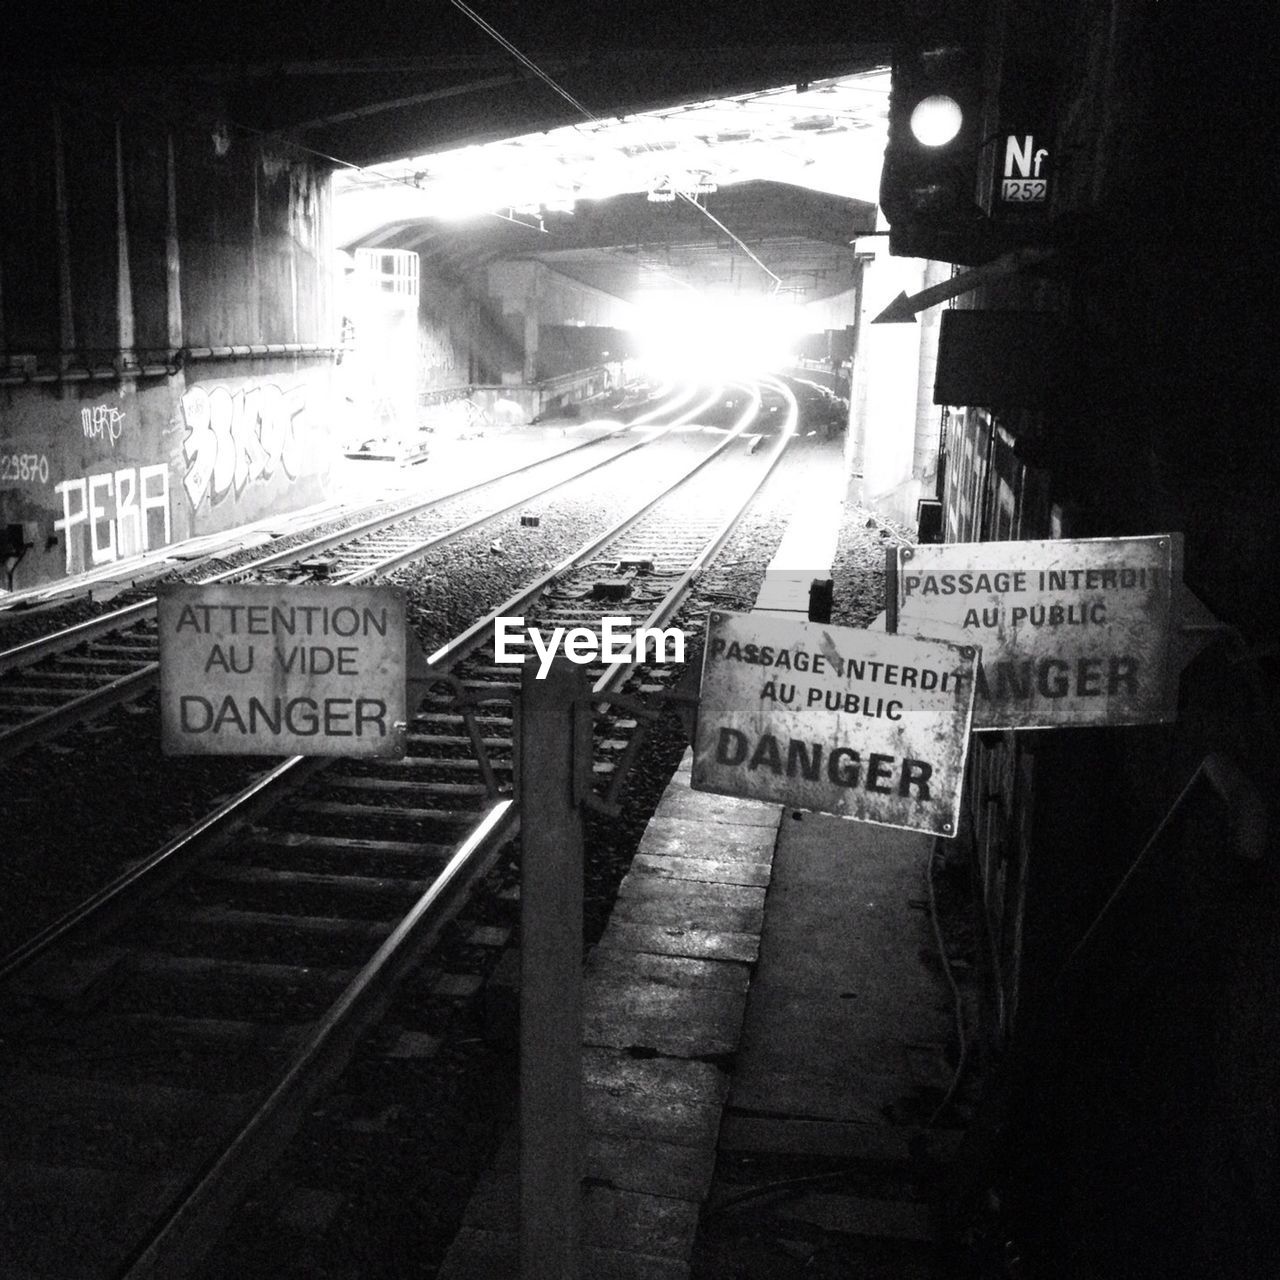 Various sign boards by railroad tracks in illuminated tunnel